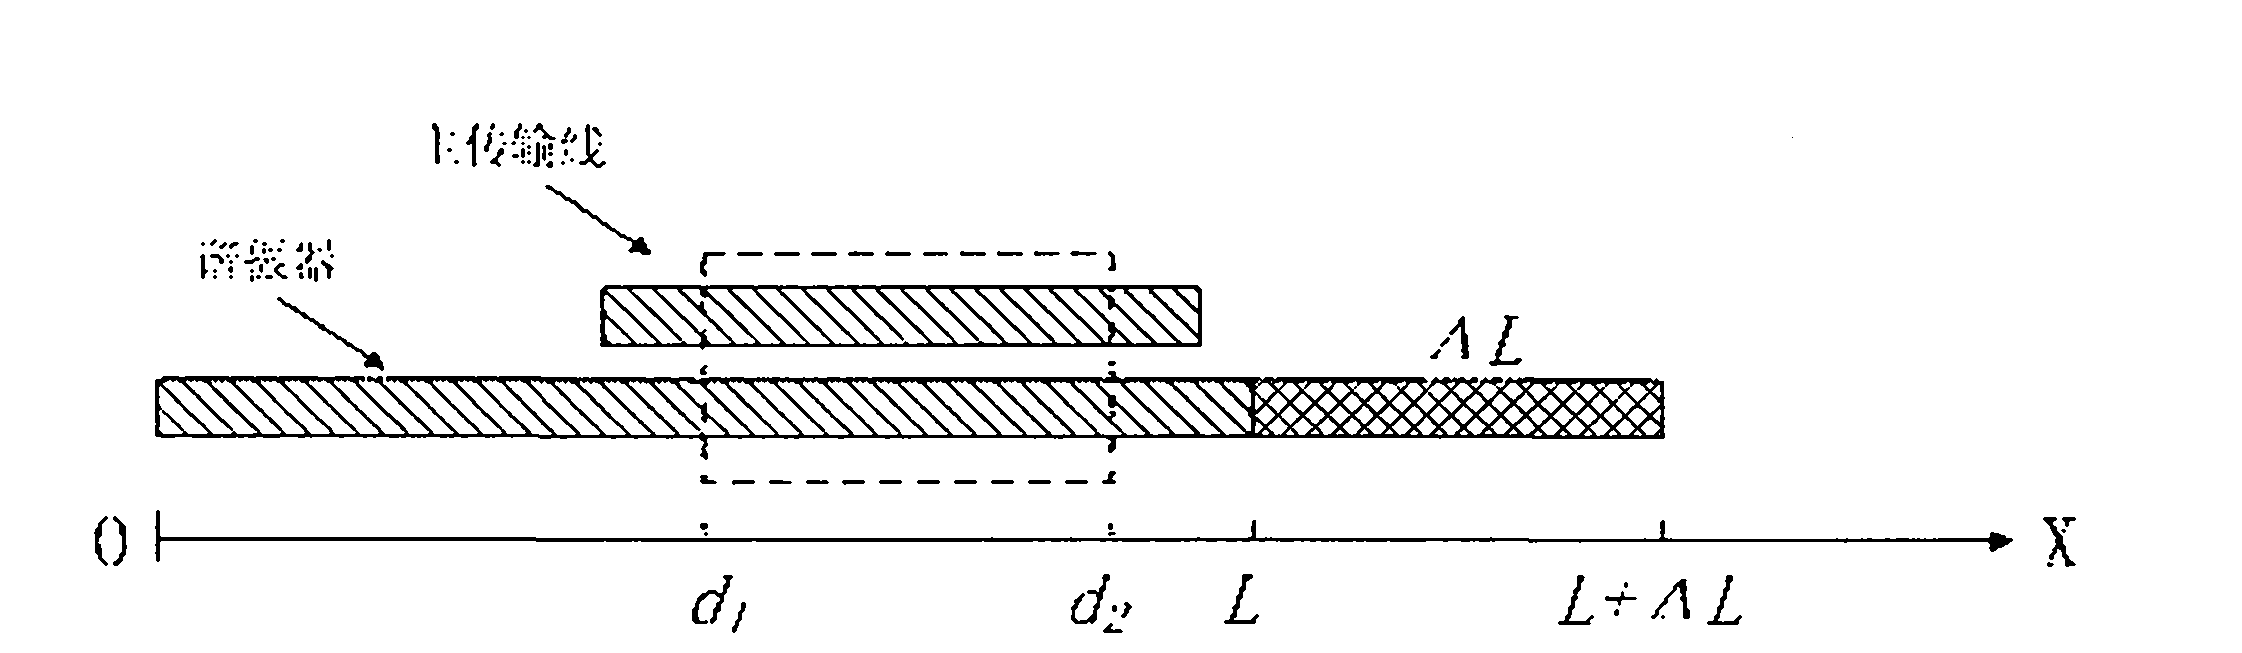 Tunable band-stop filter of constant absolute bandwidth based on modular structure